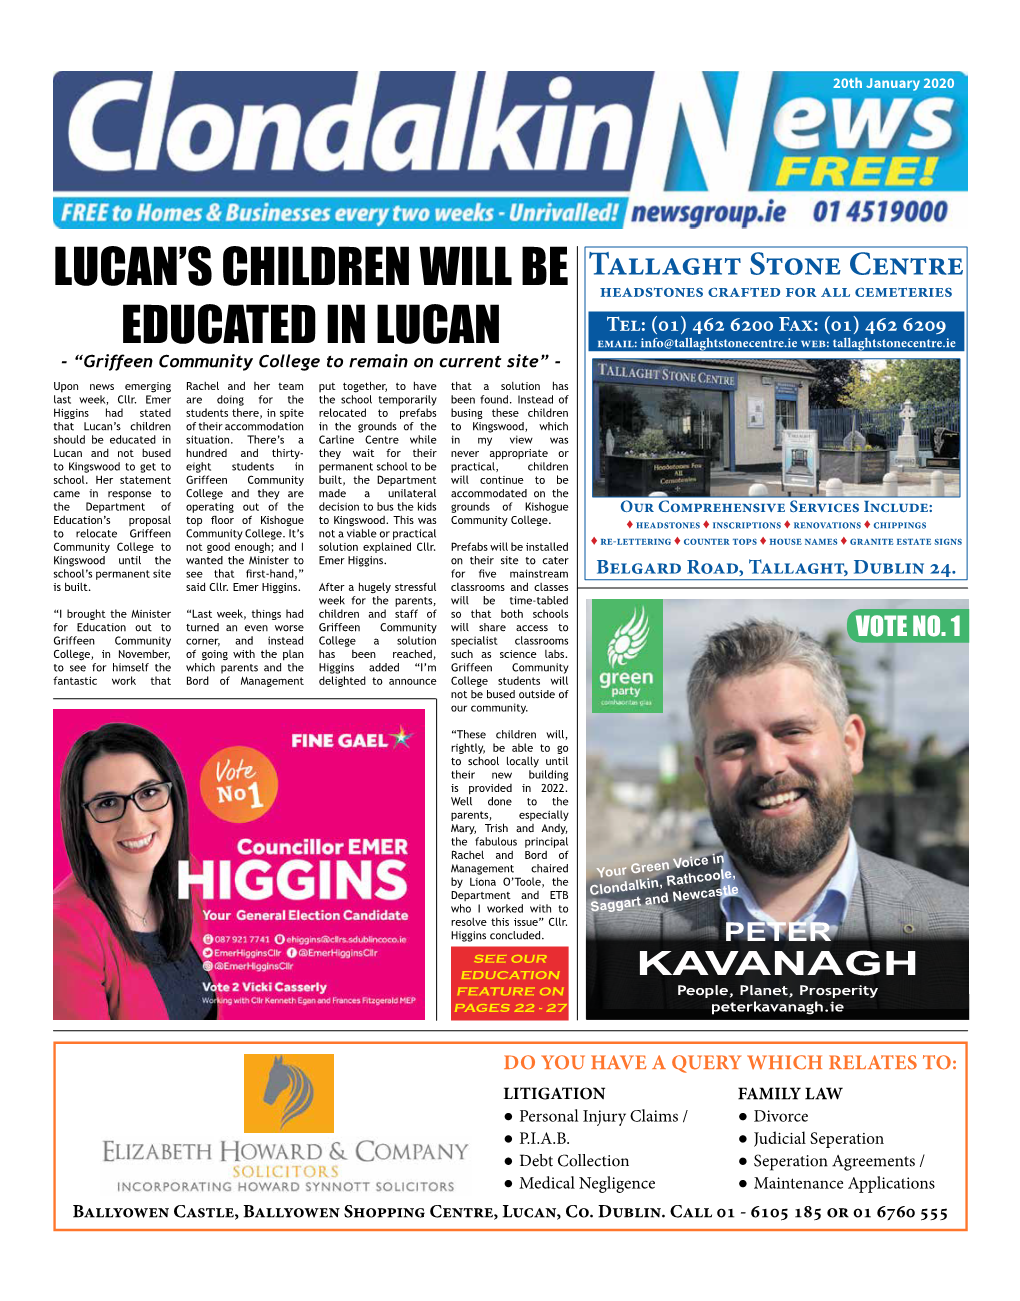 Lucan's Children Will Be Educated in Lucan